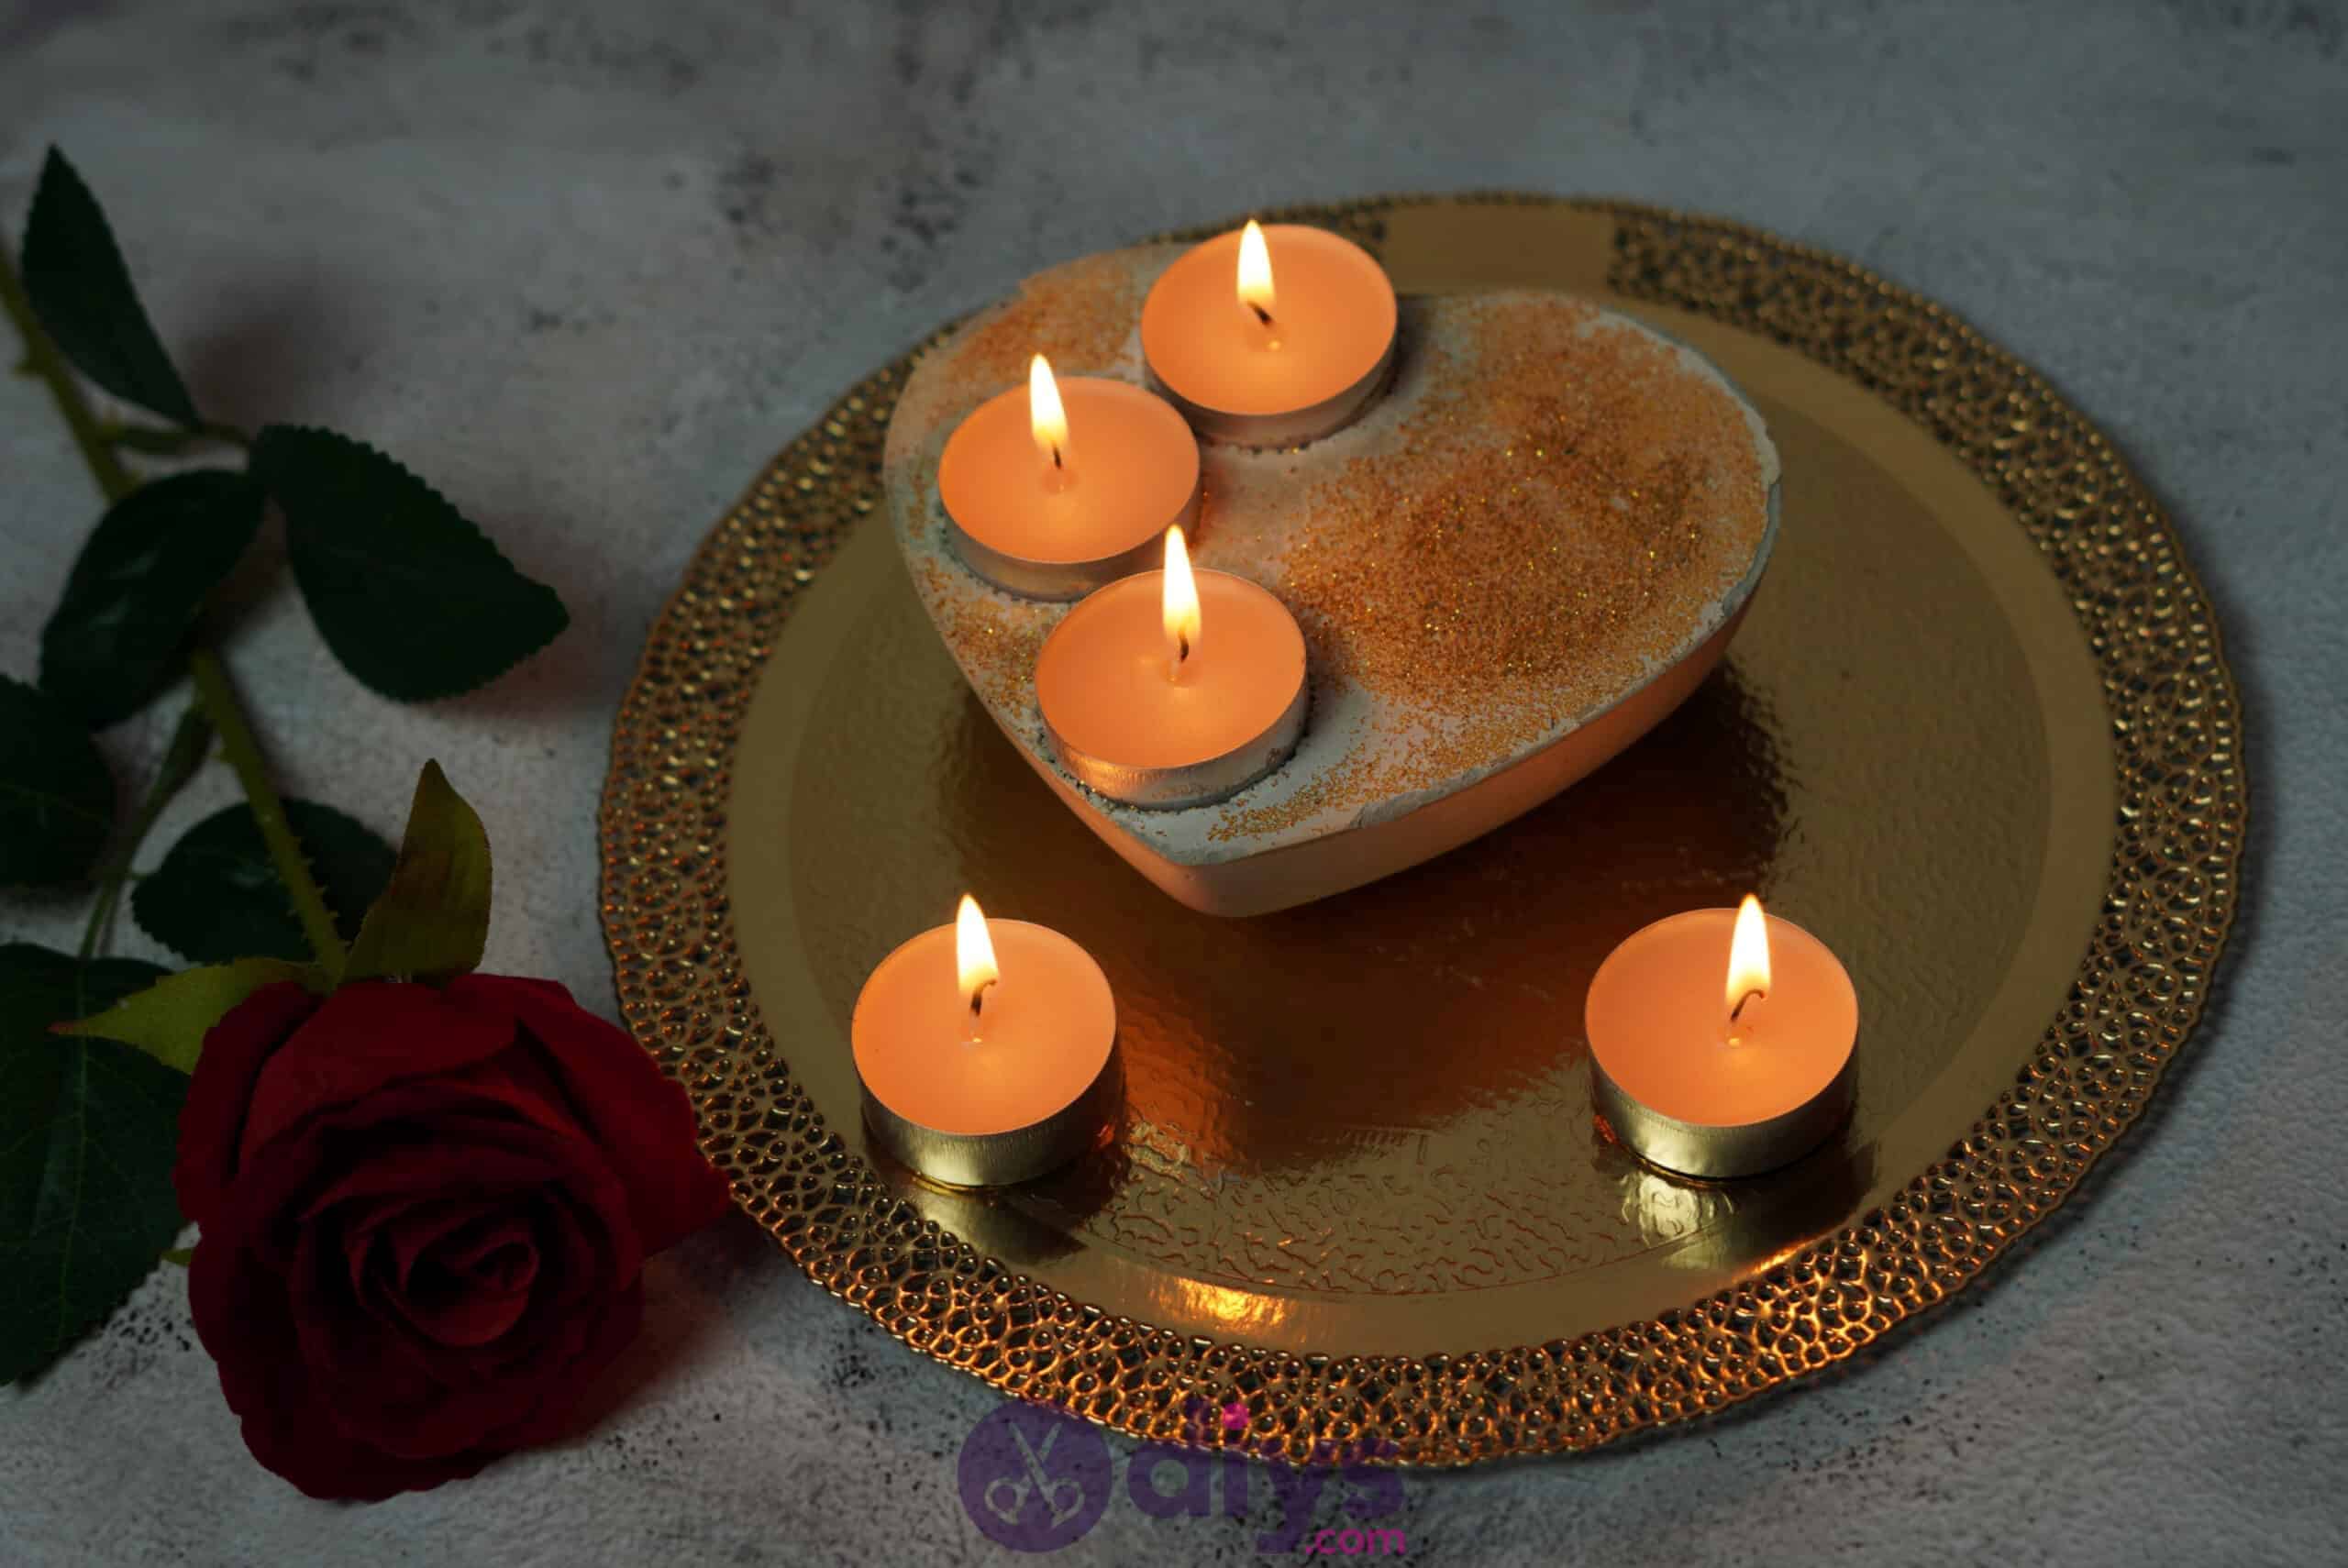 Diy concrete heart candle holder plate